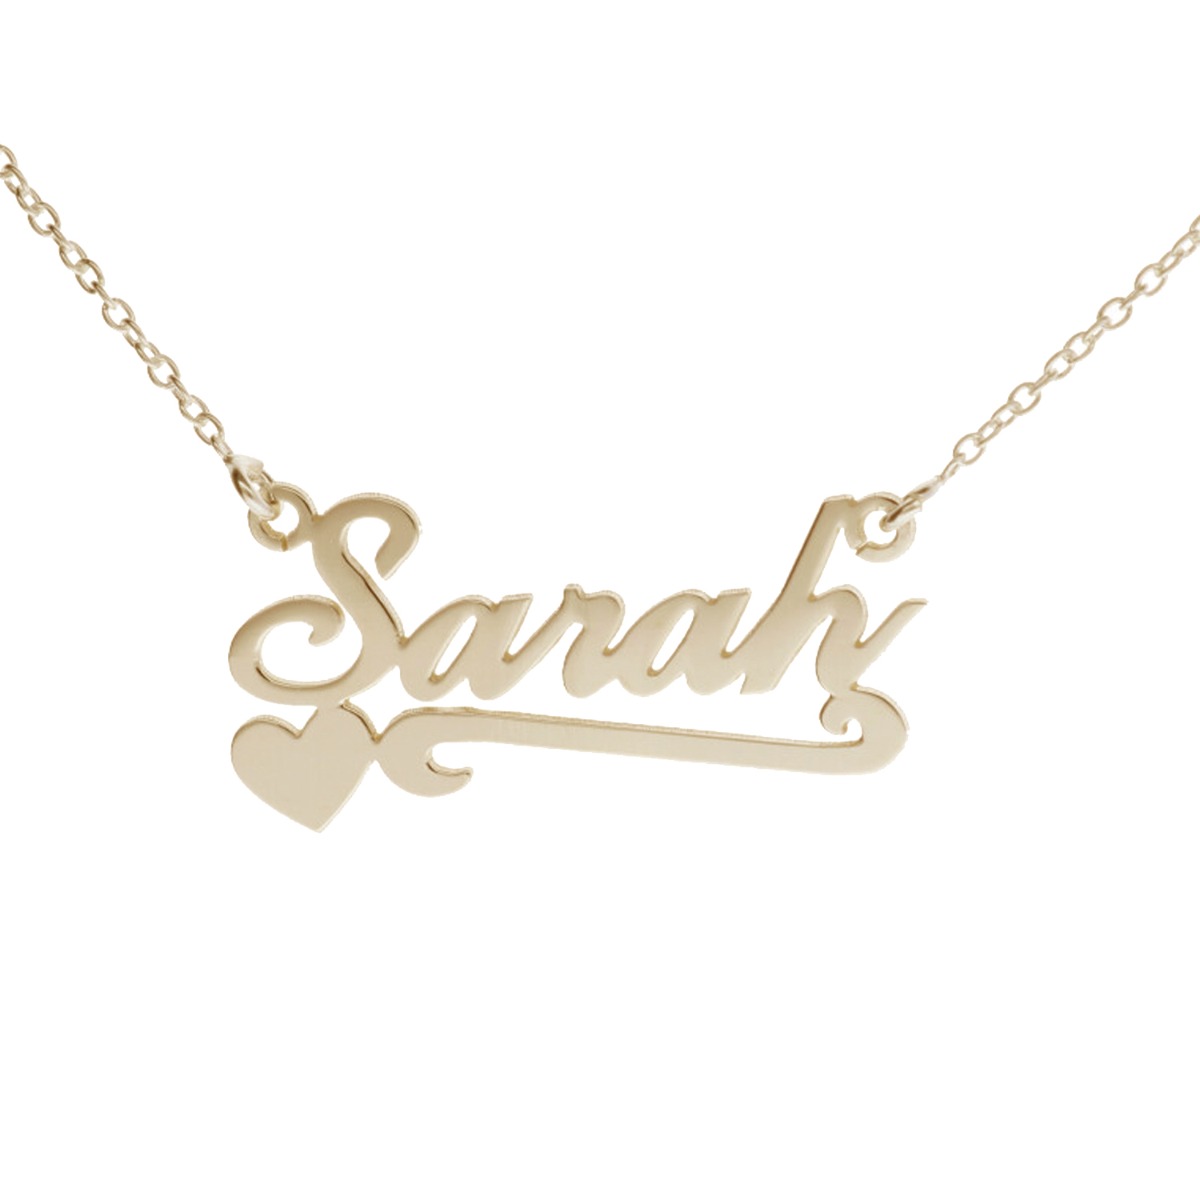 9ct Yellow Gold Carrie Style Personalised Name Necklace With Heart & Scroll